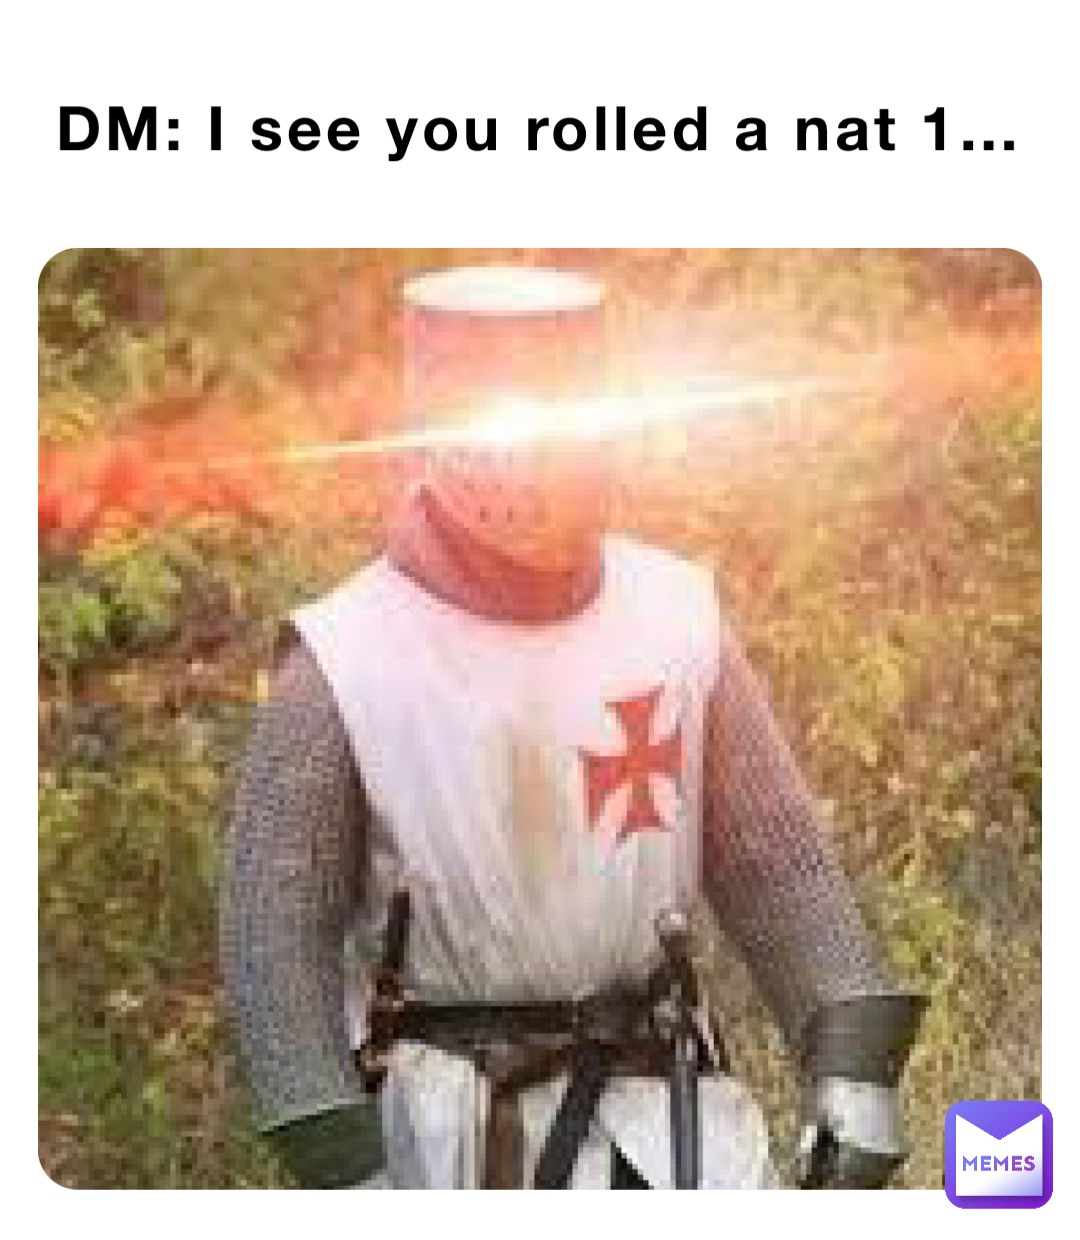 DM: I see you rolled a nat 1…